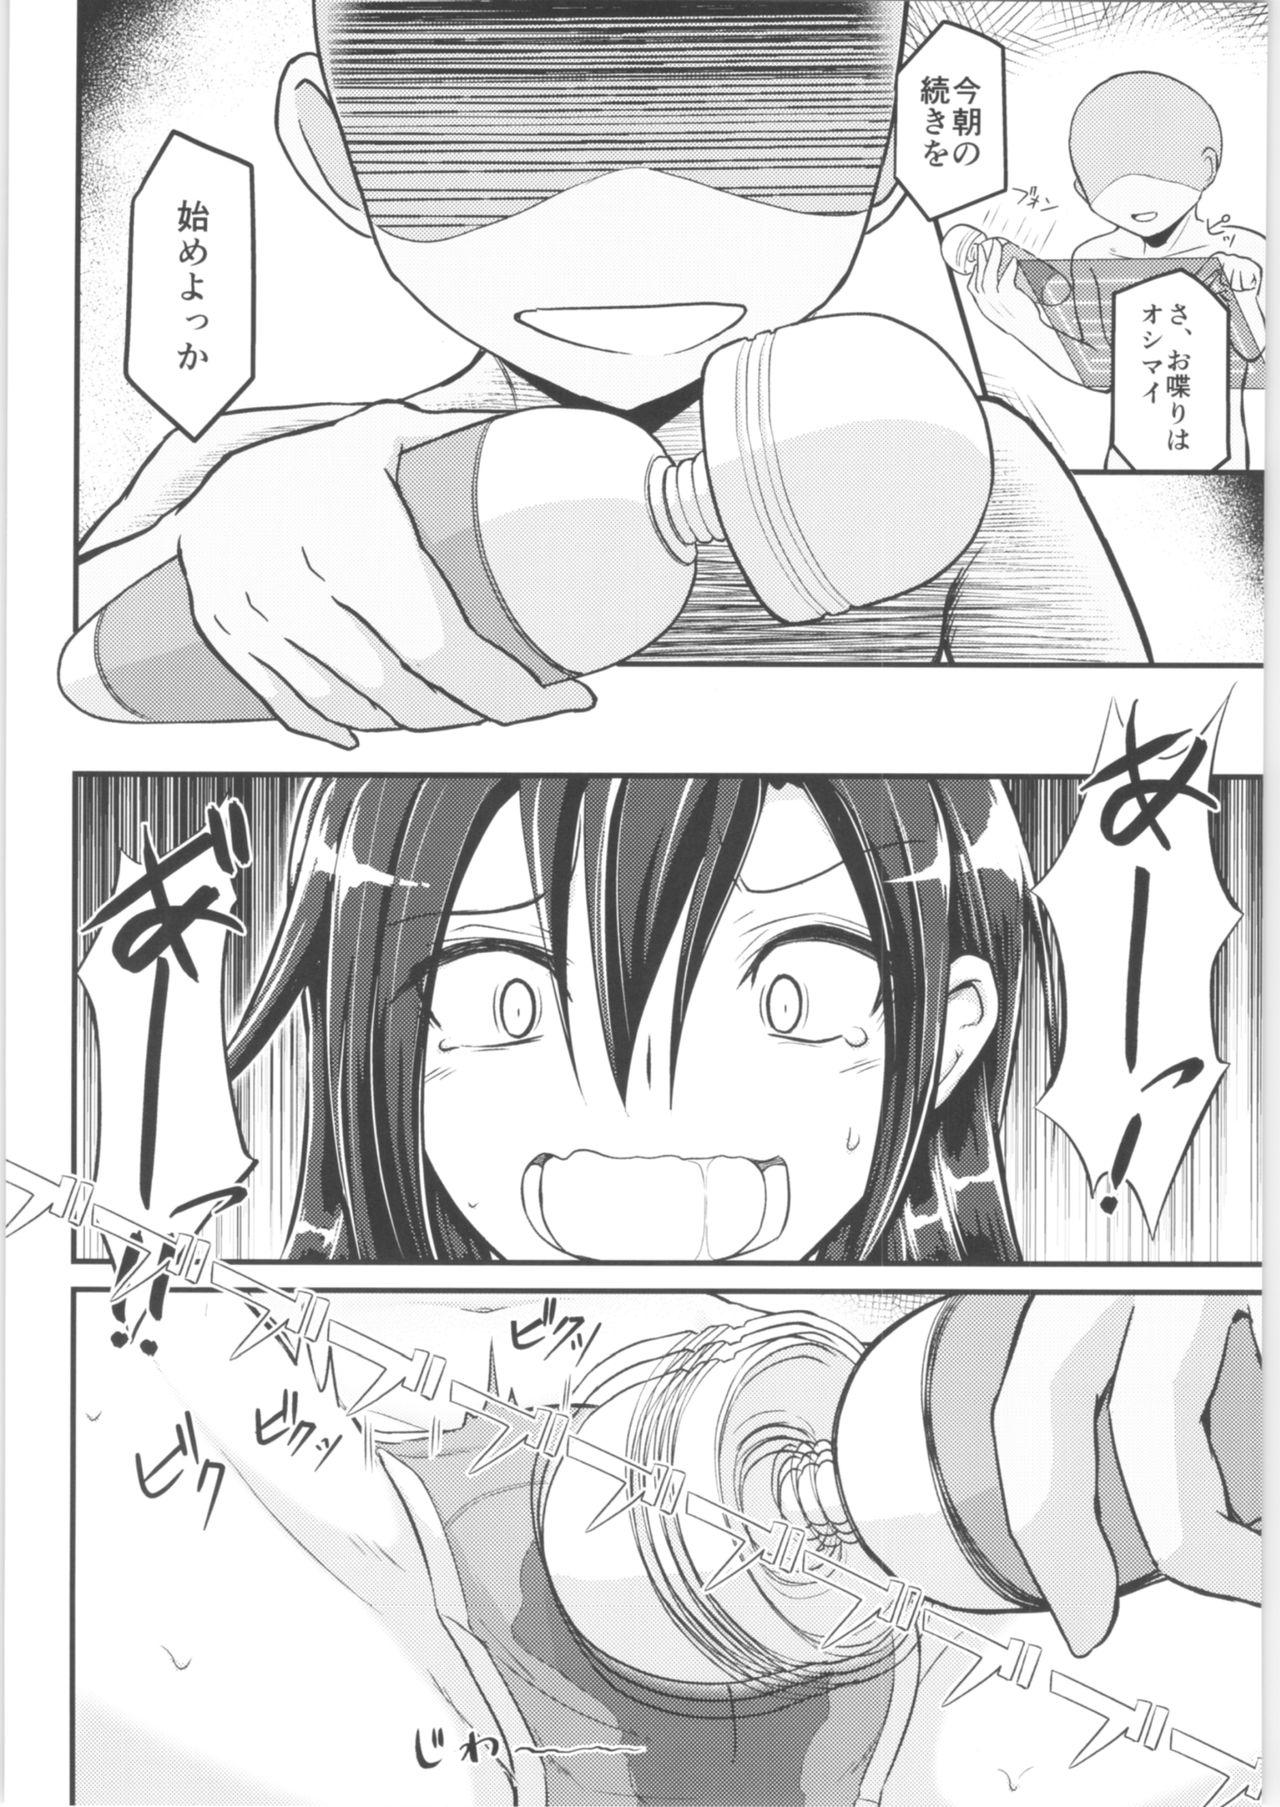 Youporn Another 01 - Sword art online Dorm - Page 9